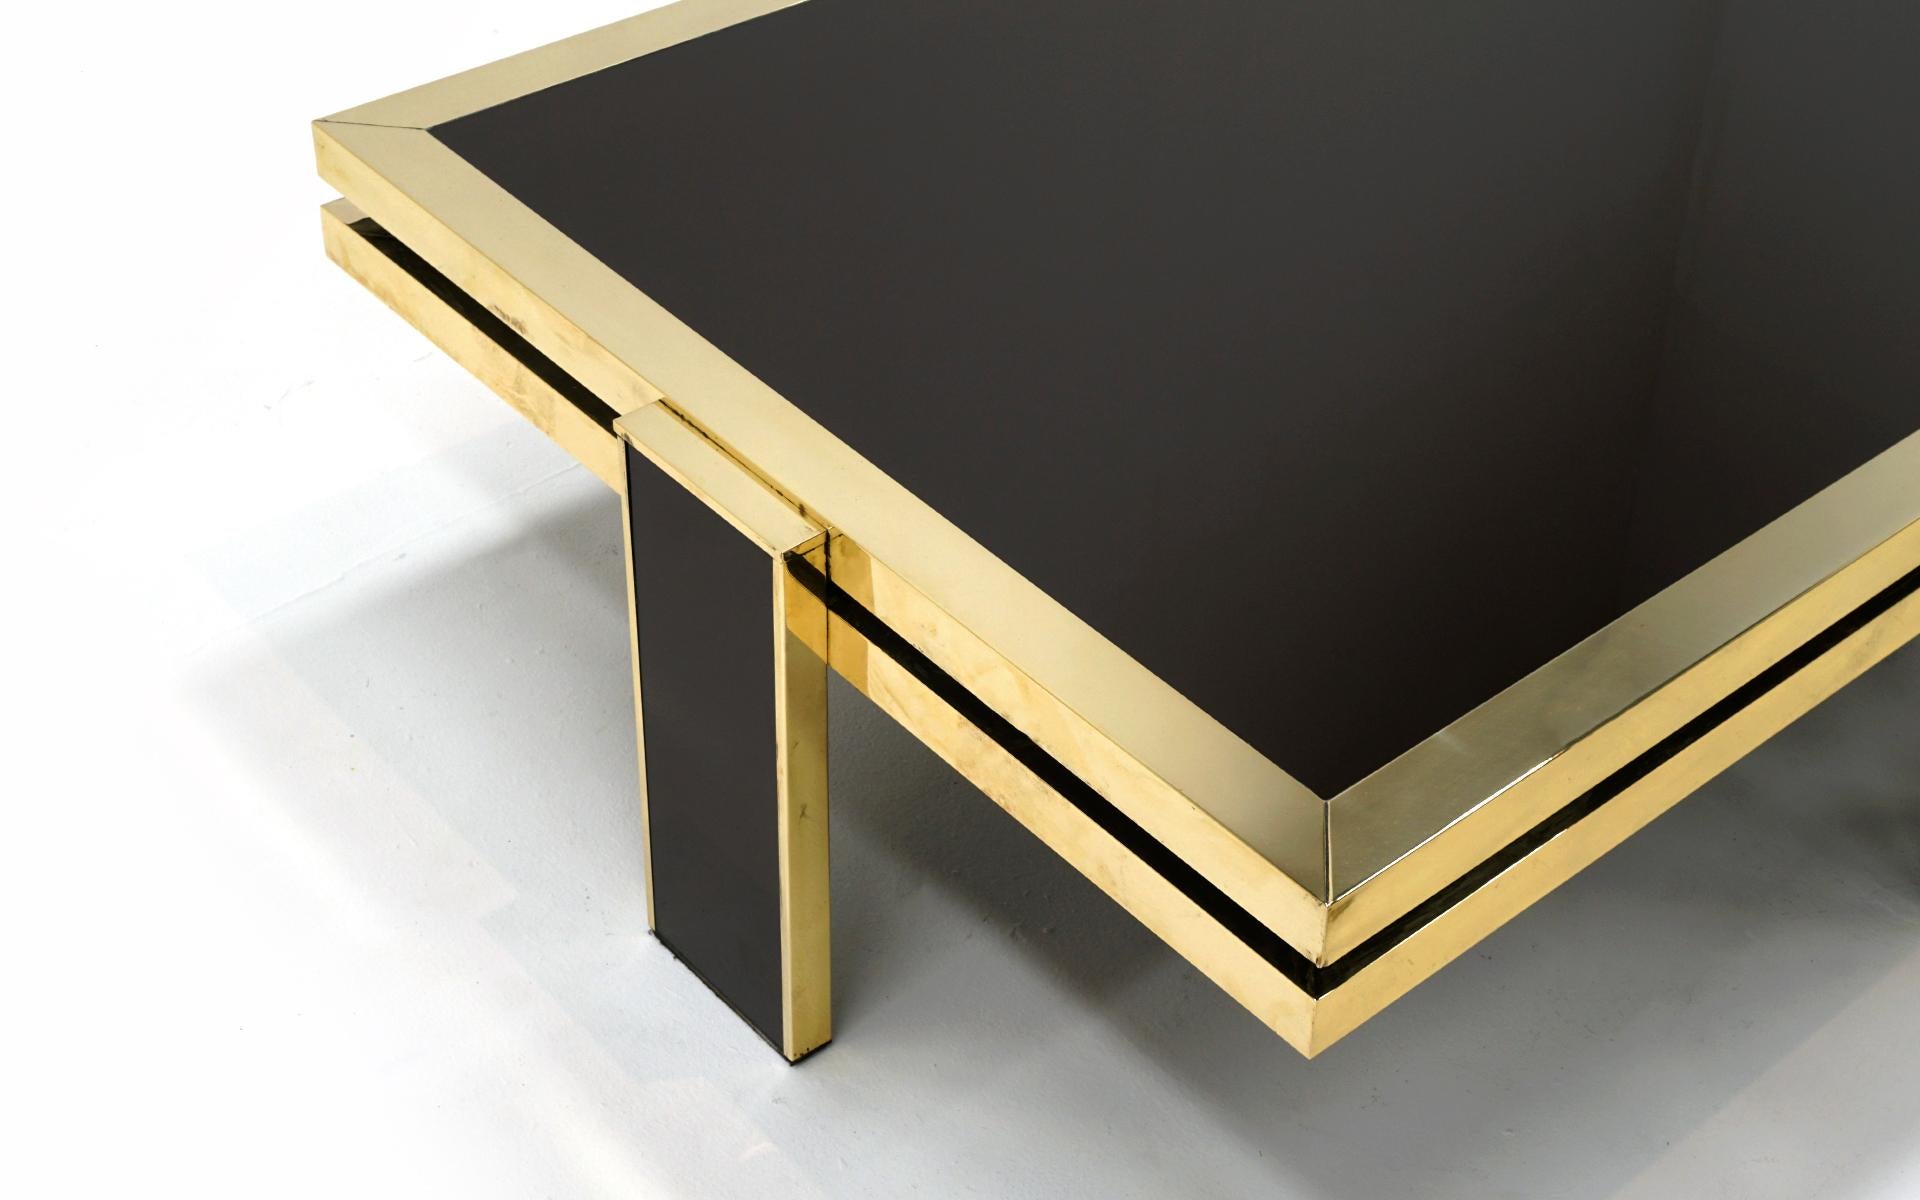 Brass and Colored Glass Coffee Table by Giacomo Sinopoli for Liwan's Rome 1970s  In Good Condition For Sale In Kansas City, MO